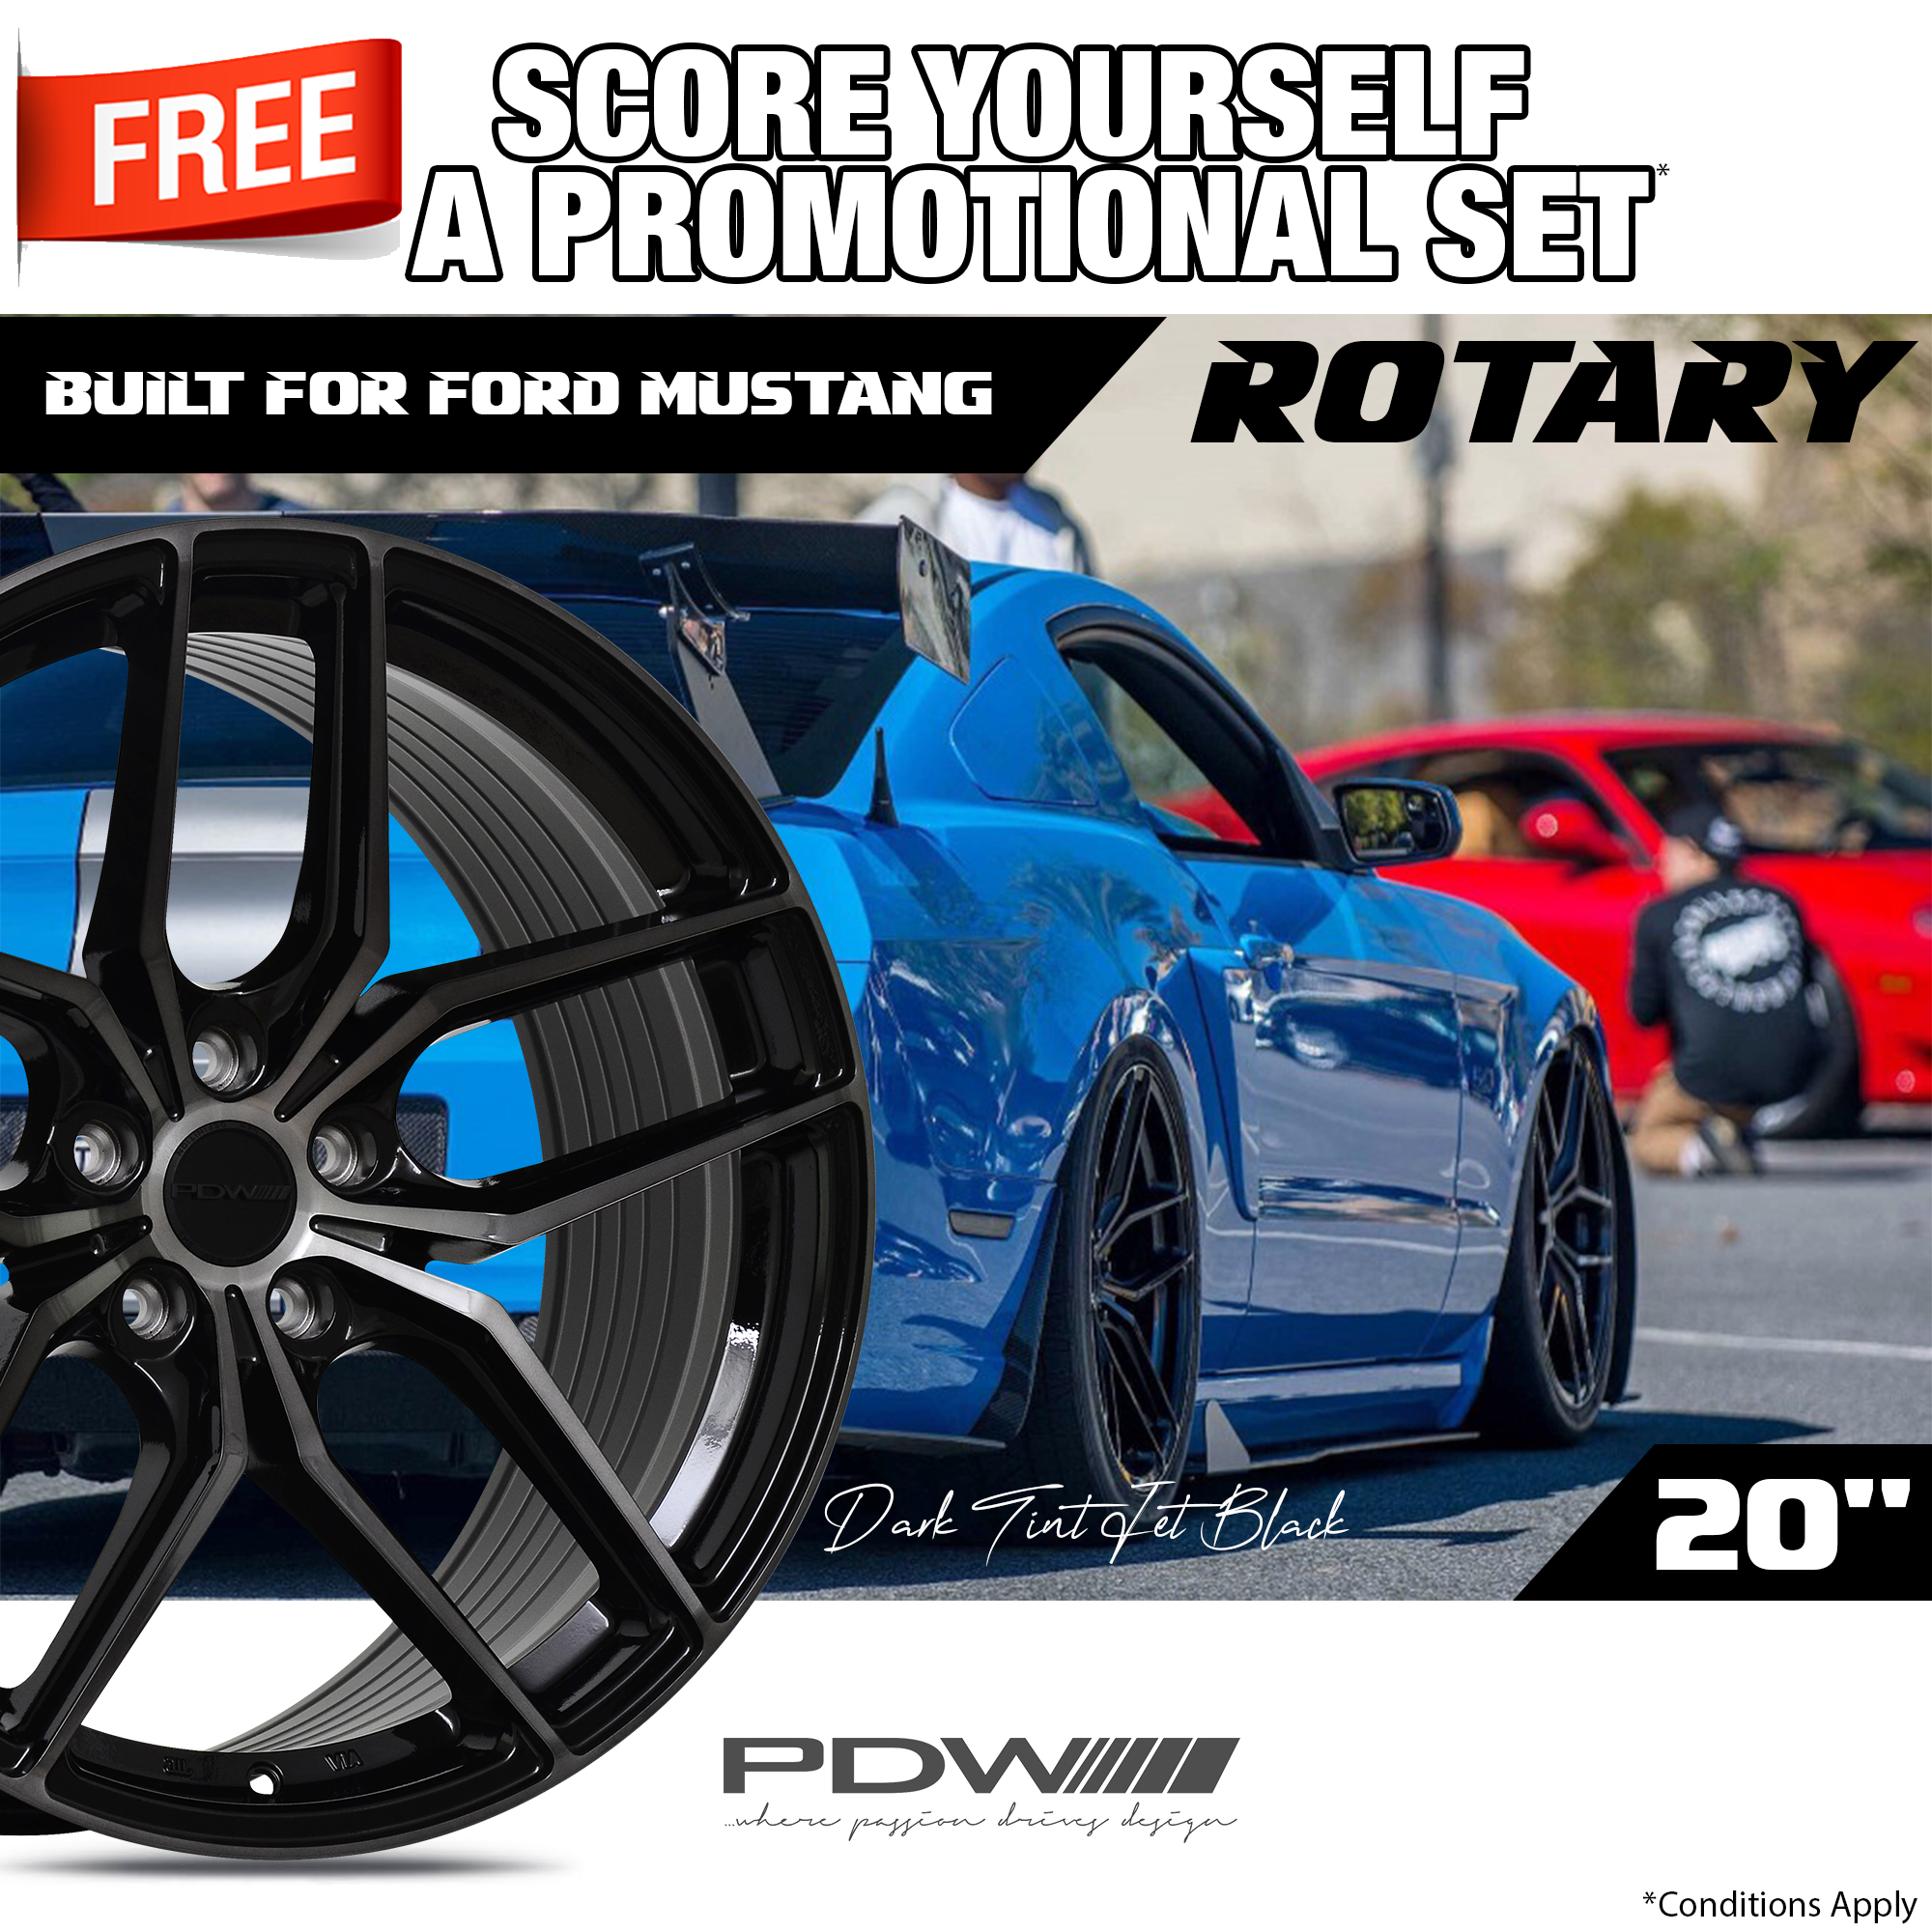 FREE-ROTARY-for-MUSTANG